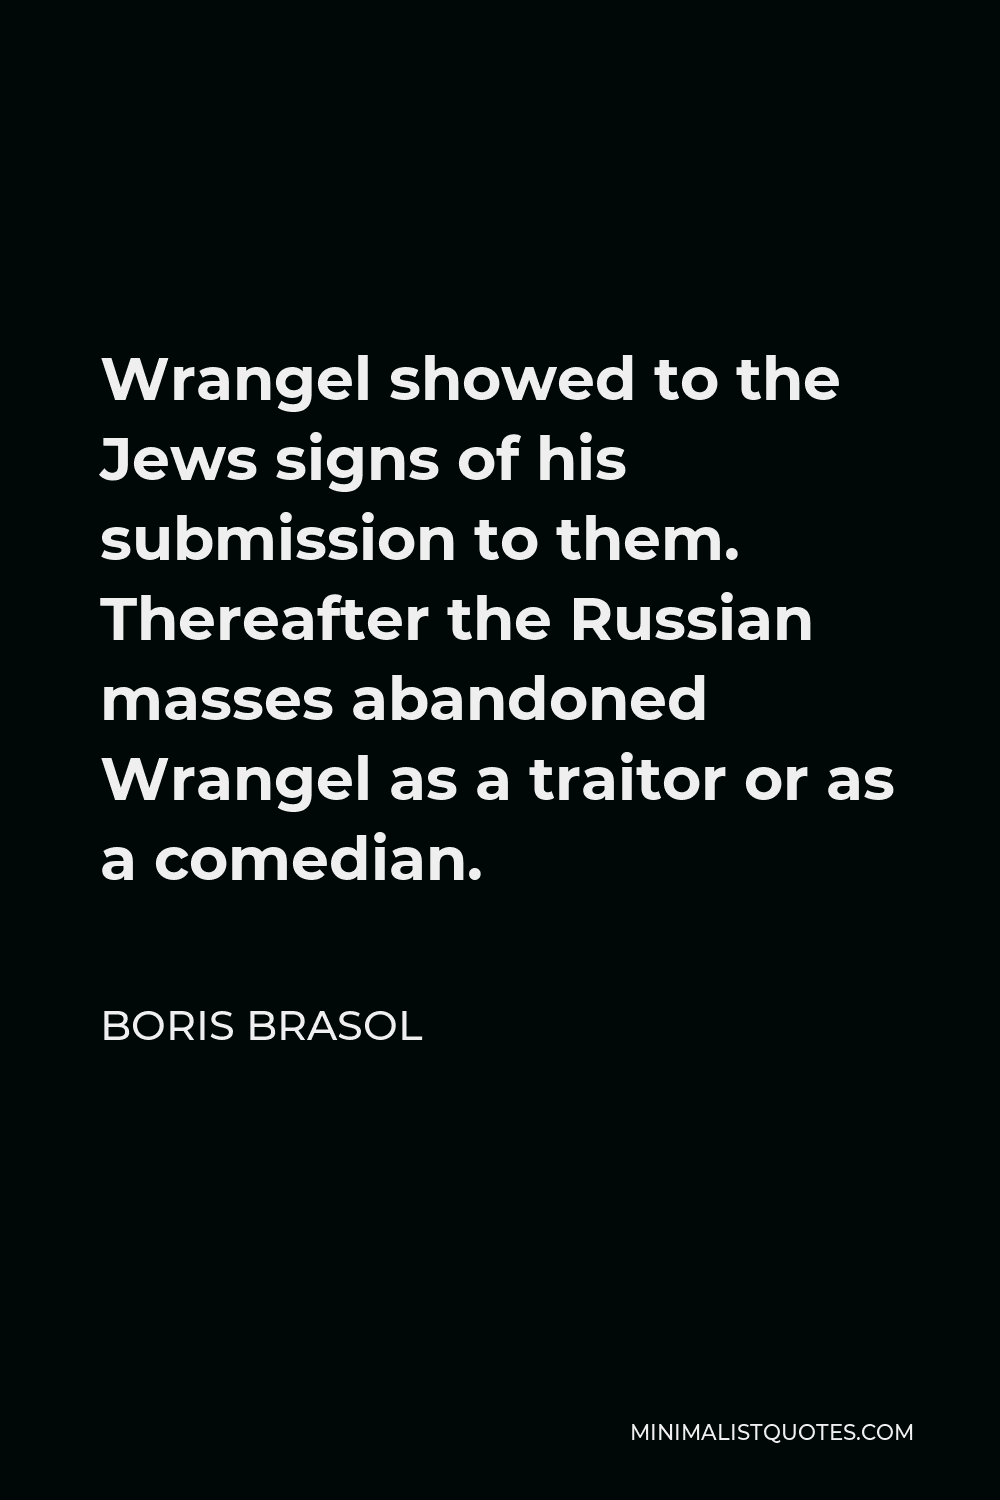 Boris Brasol Quote - Wrangel showed to the Jews signs of his submission to them. Thereafter the Russian masses abandoned Wrangel as a traitor or as a comedian.